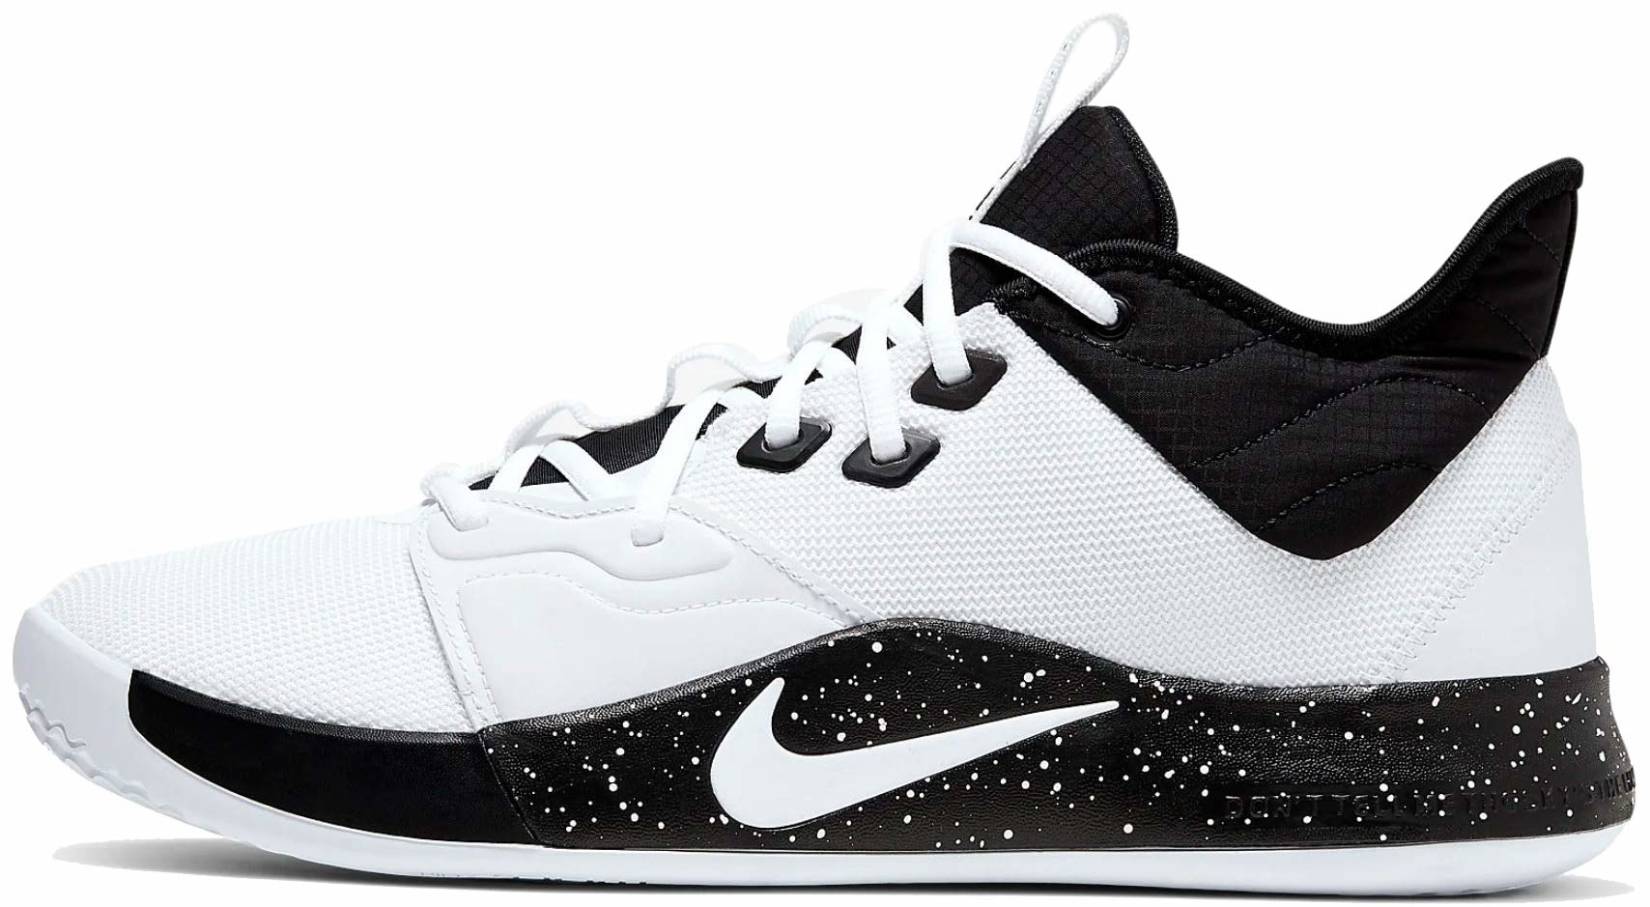 Save 21% on White Basketball Shoes (183 